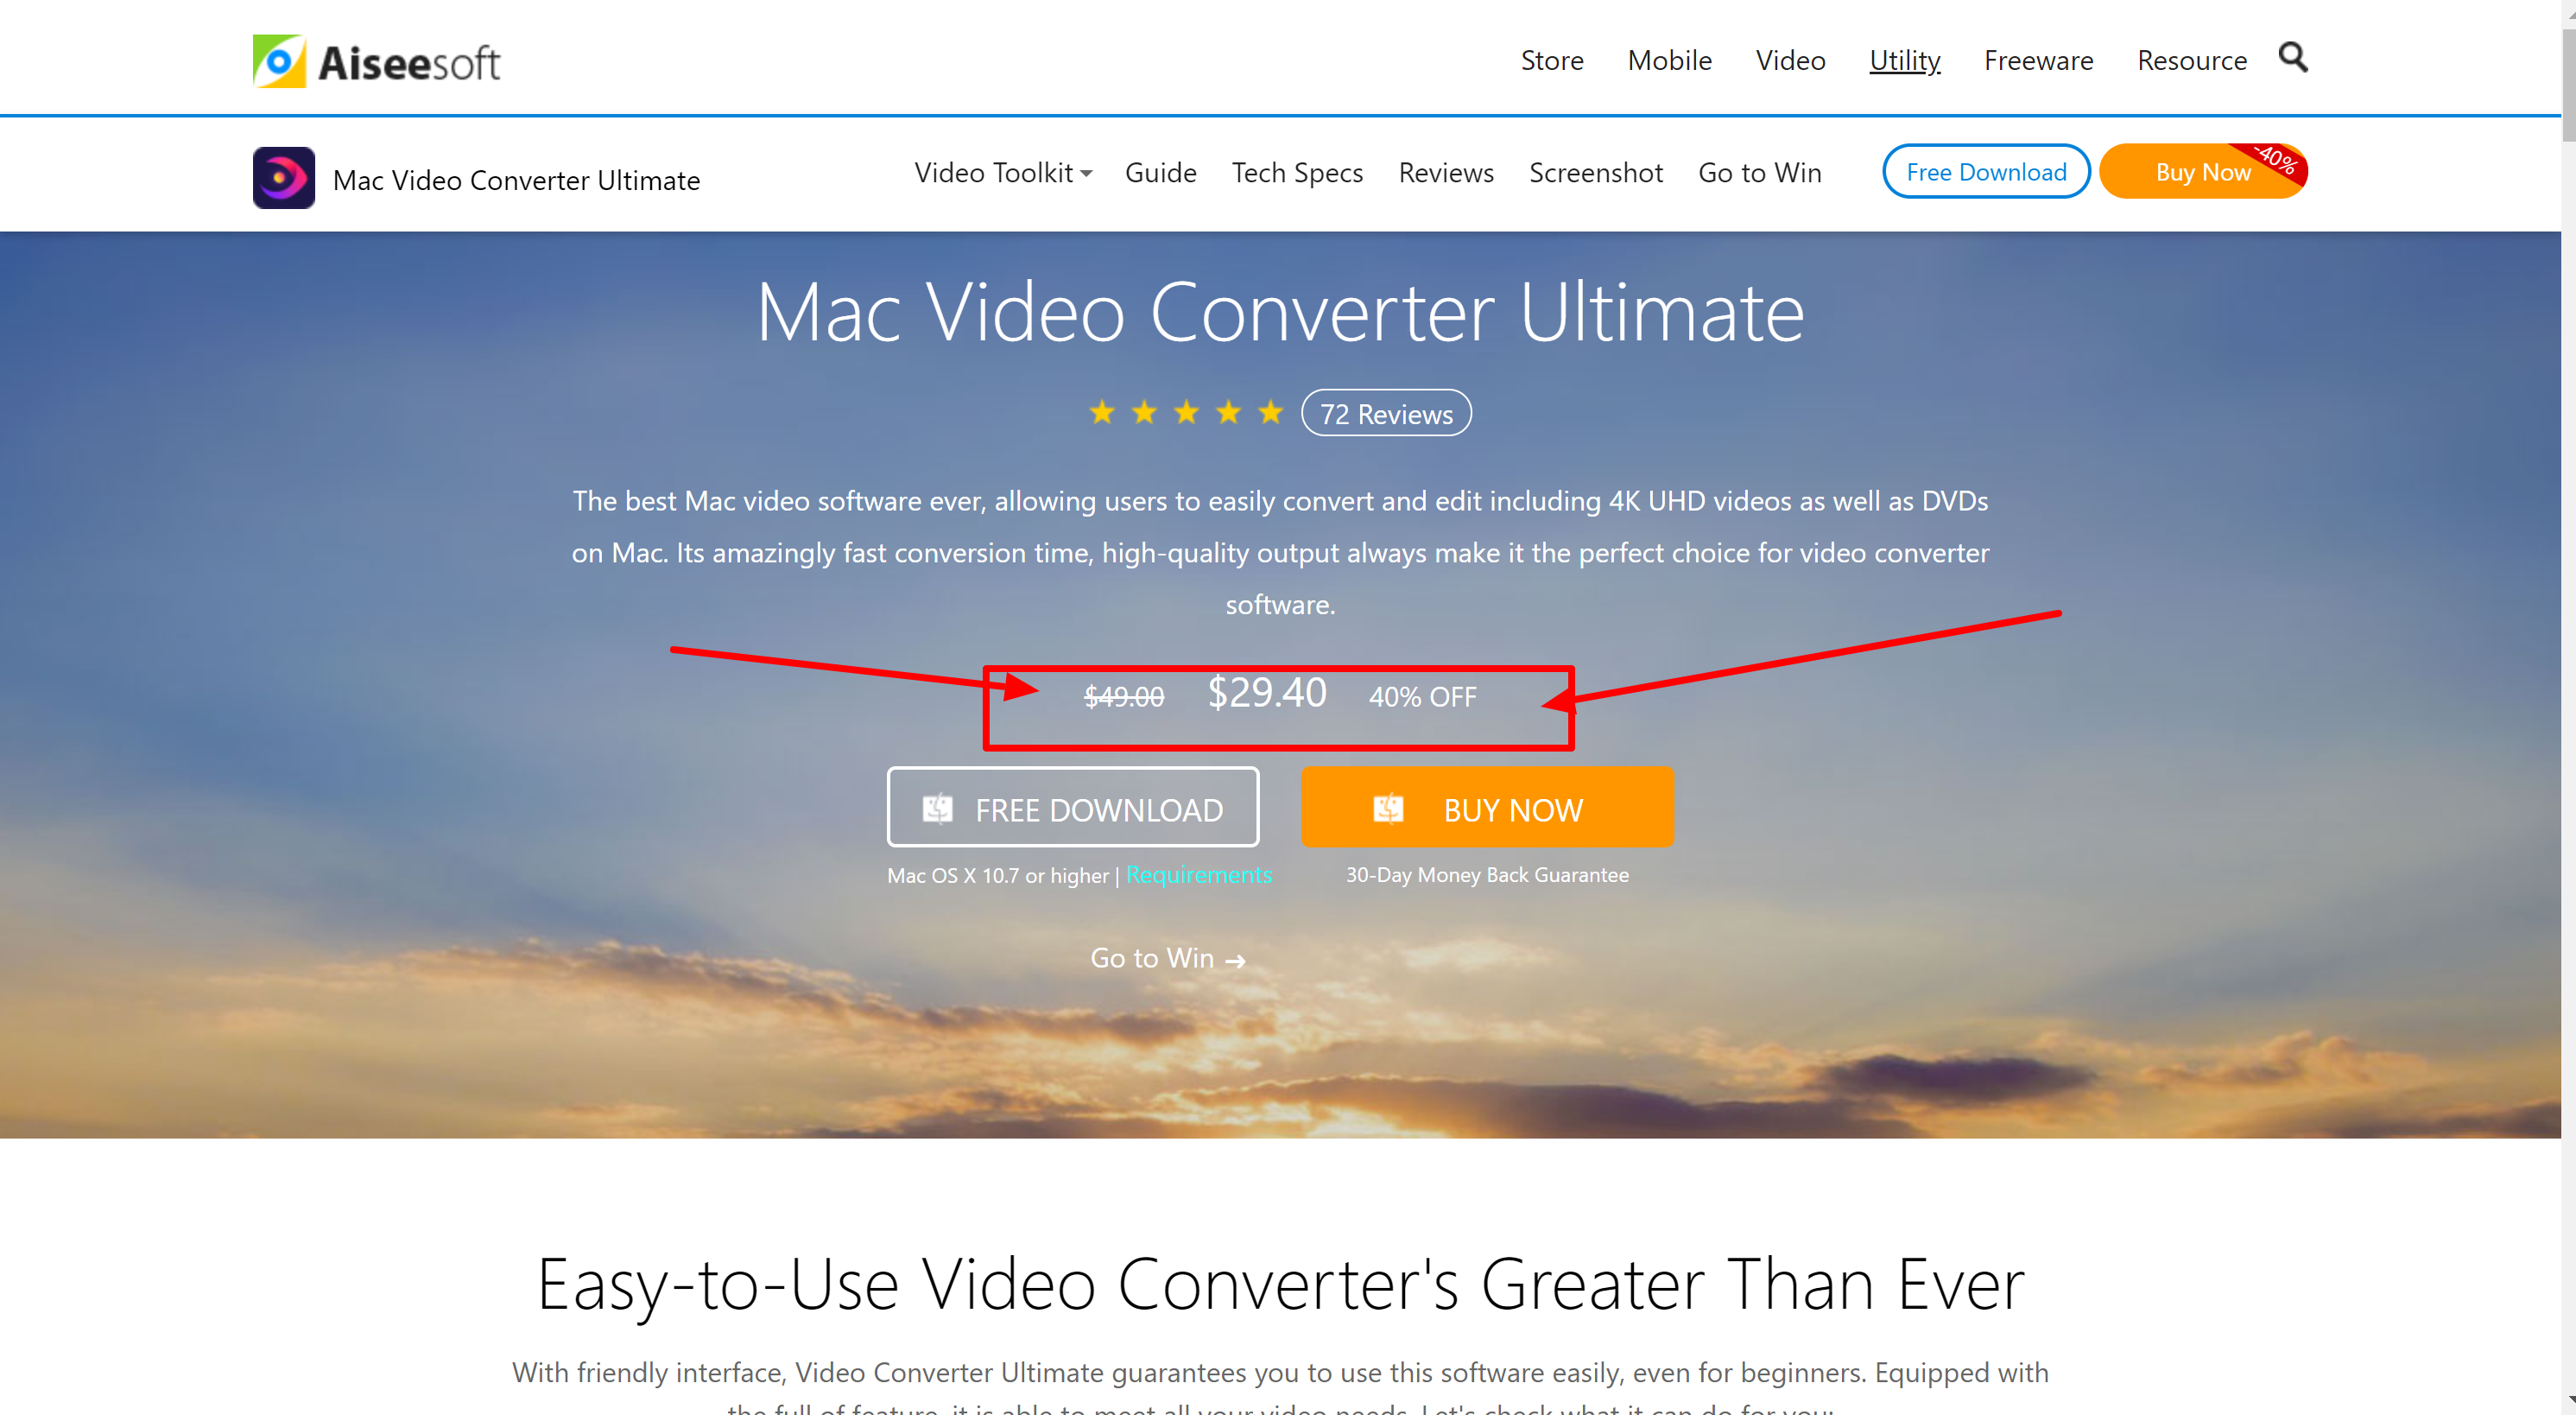 Aiseesoft Review 2023: Is It The Best Video Converter Tool